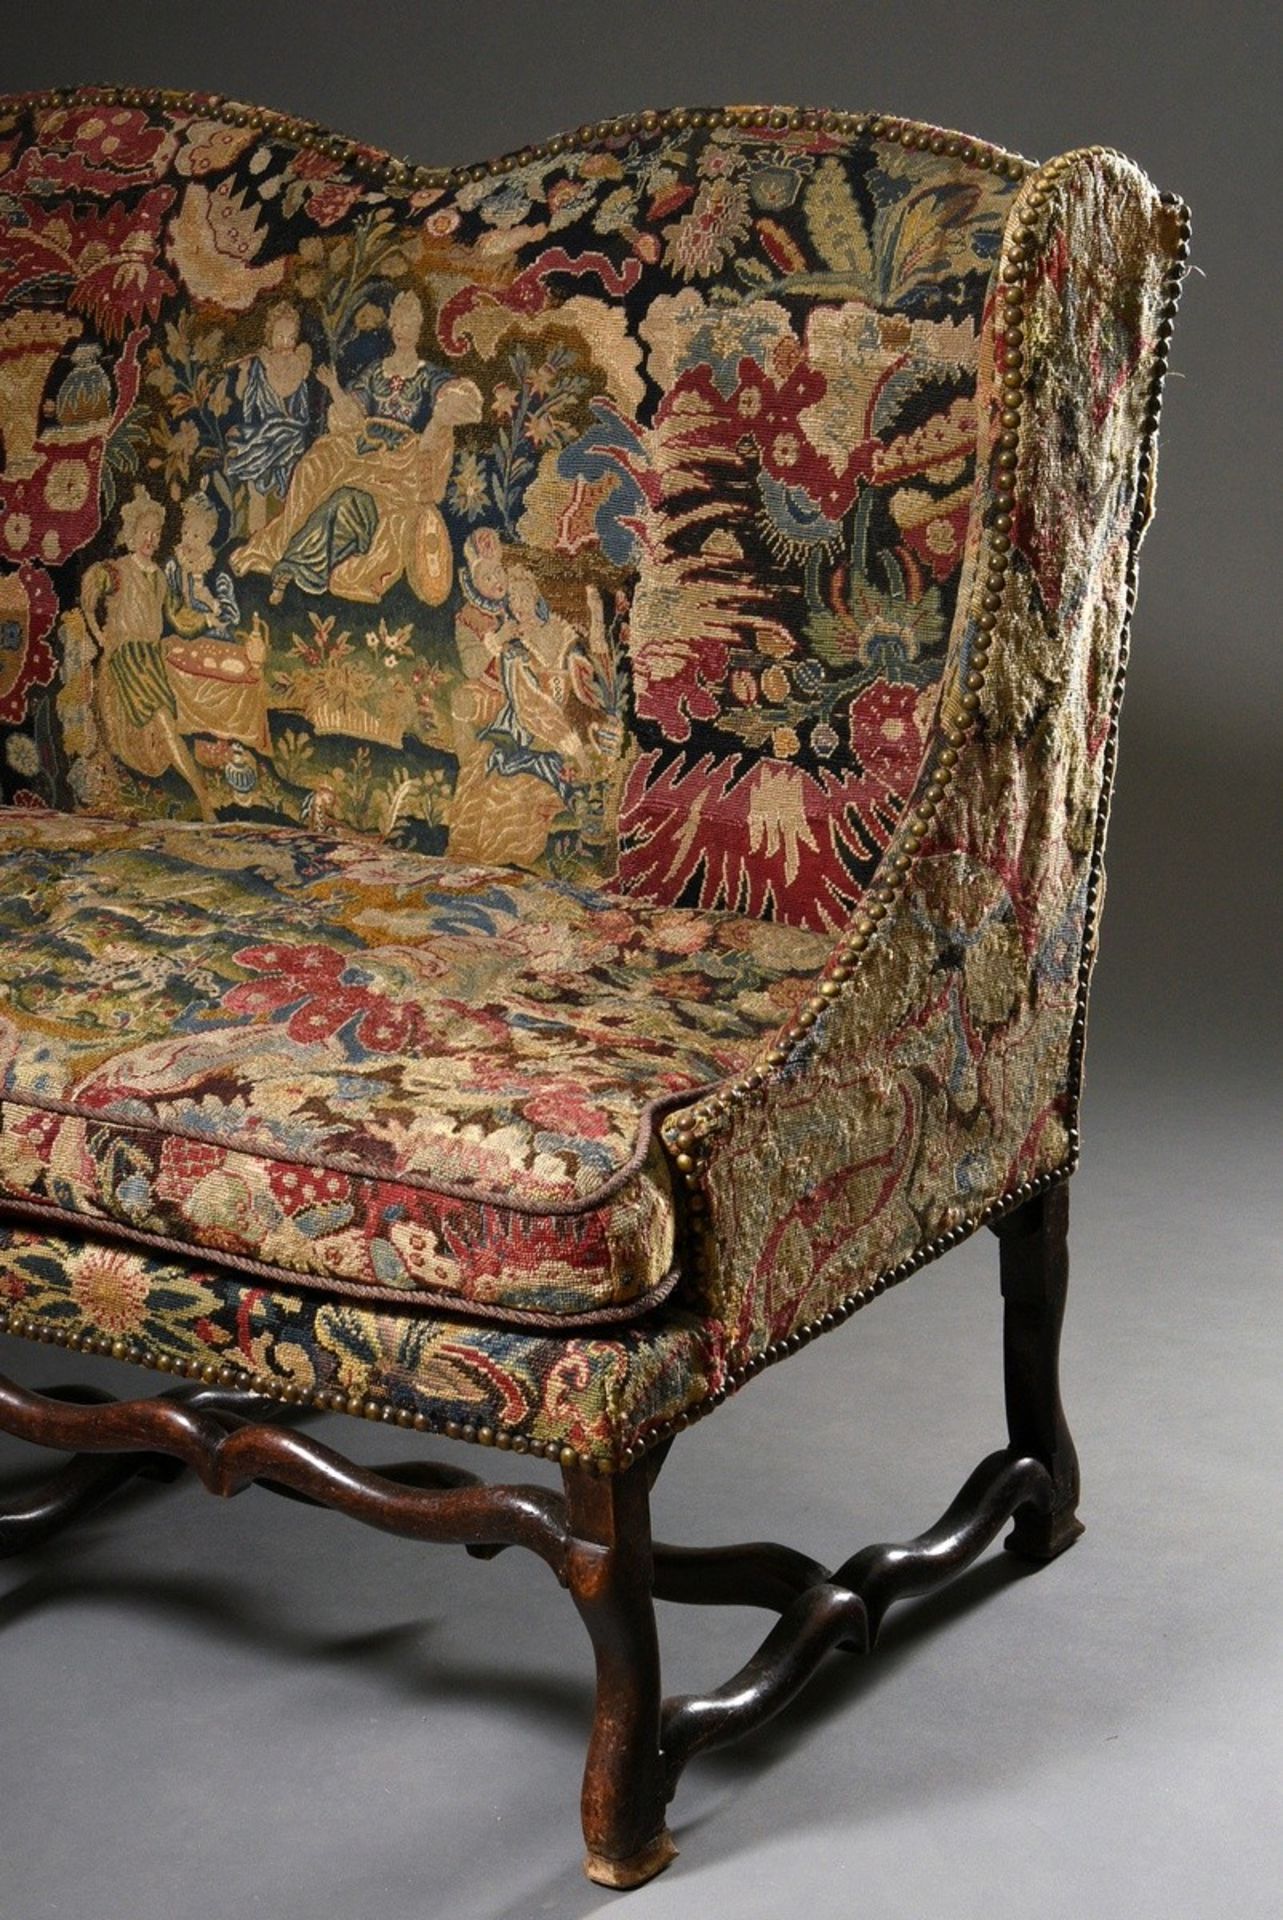 William & Mary "Loveseat" bench with carved frame and original embroidered upholstery "Lovers and H - Image 2 of 10